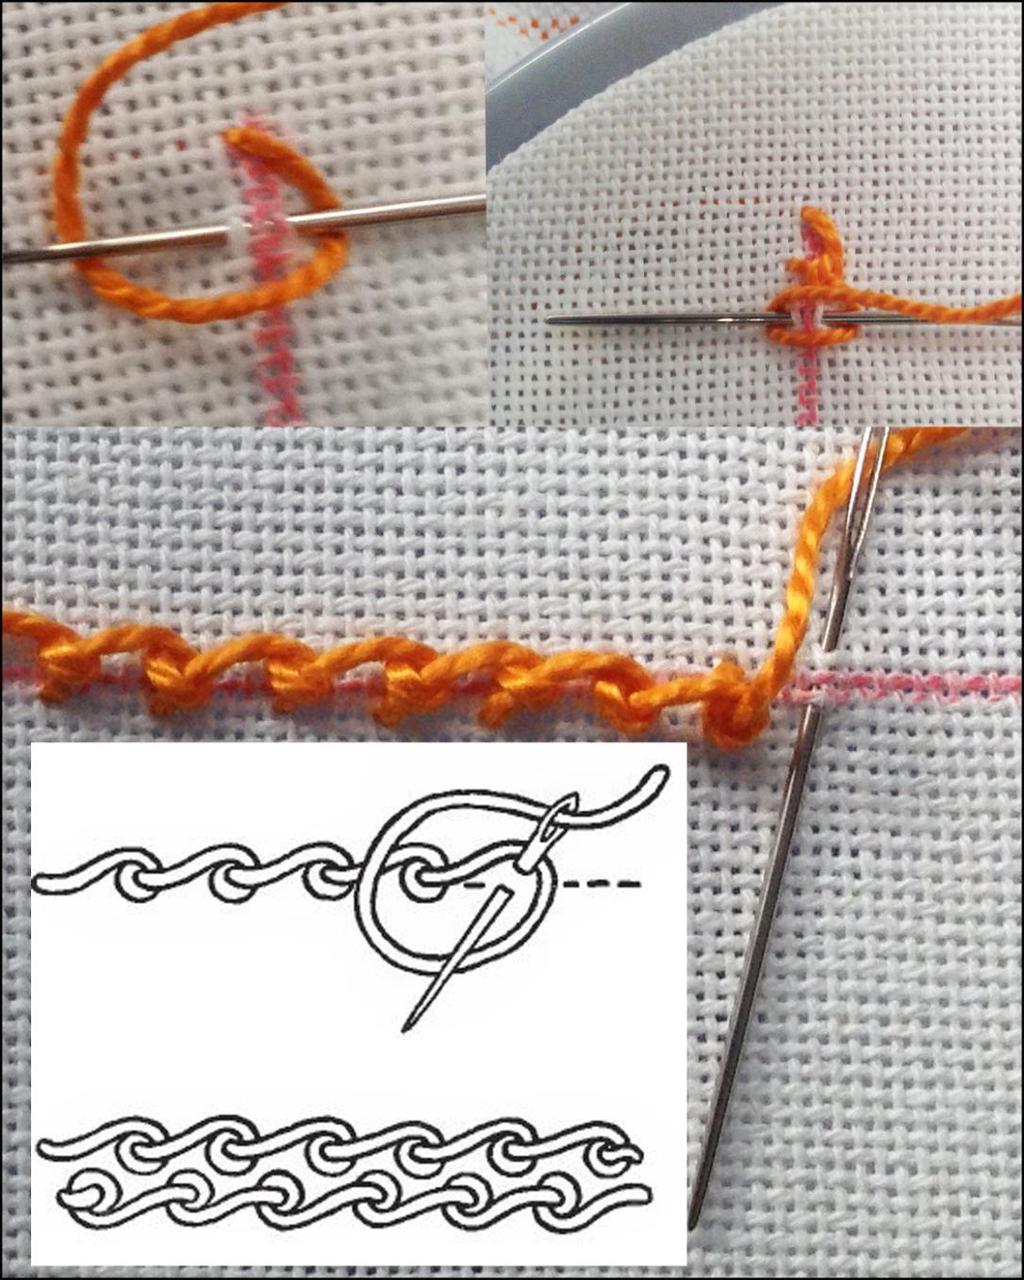 c. This completes the first stitch. Continue down the line picking up a small piece of material, wrapping the thread round the needle and pulling it through.